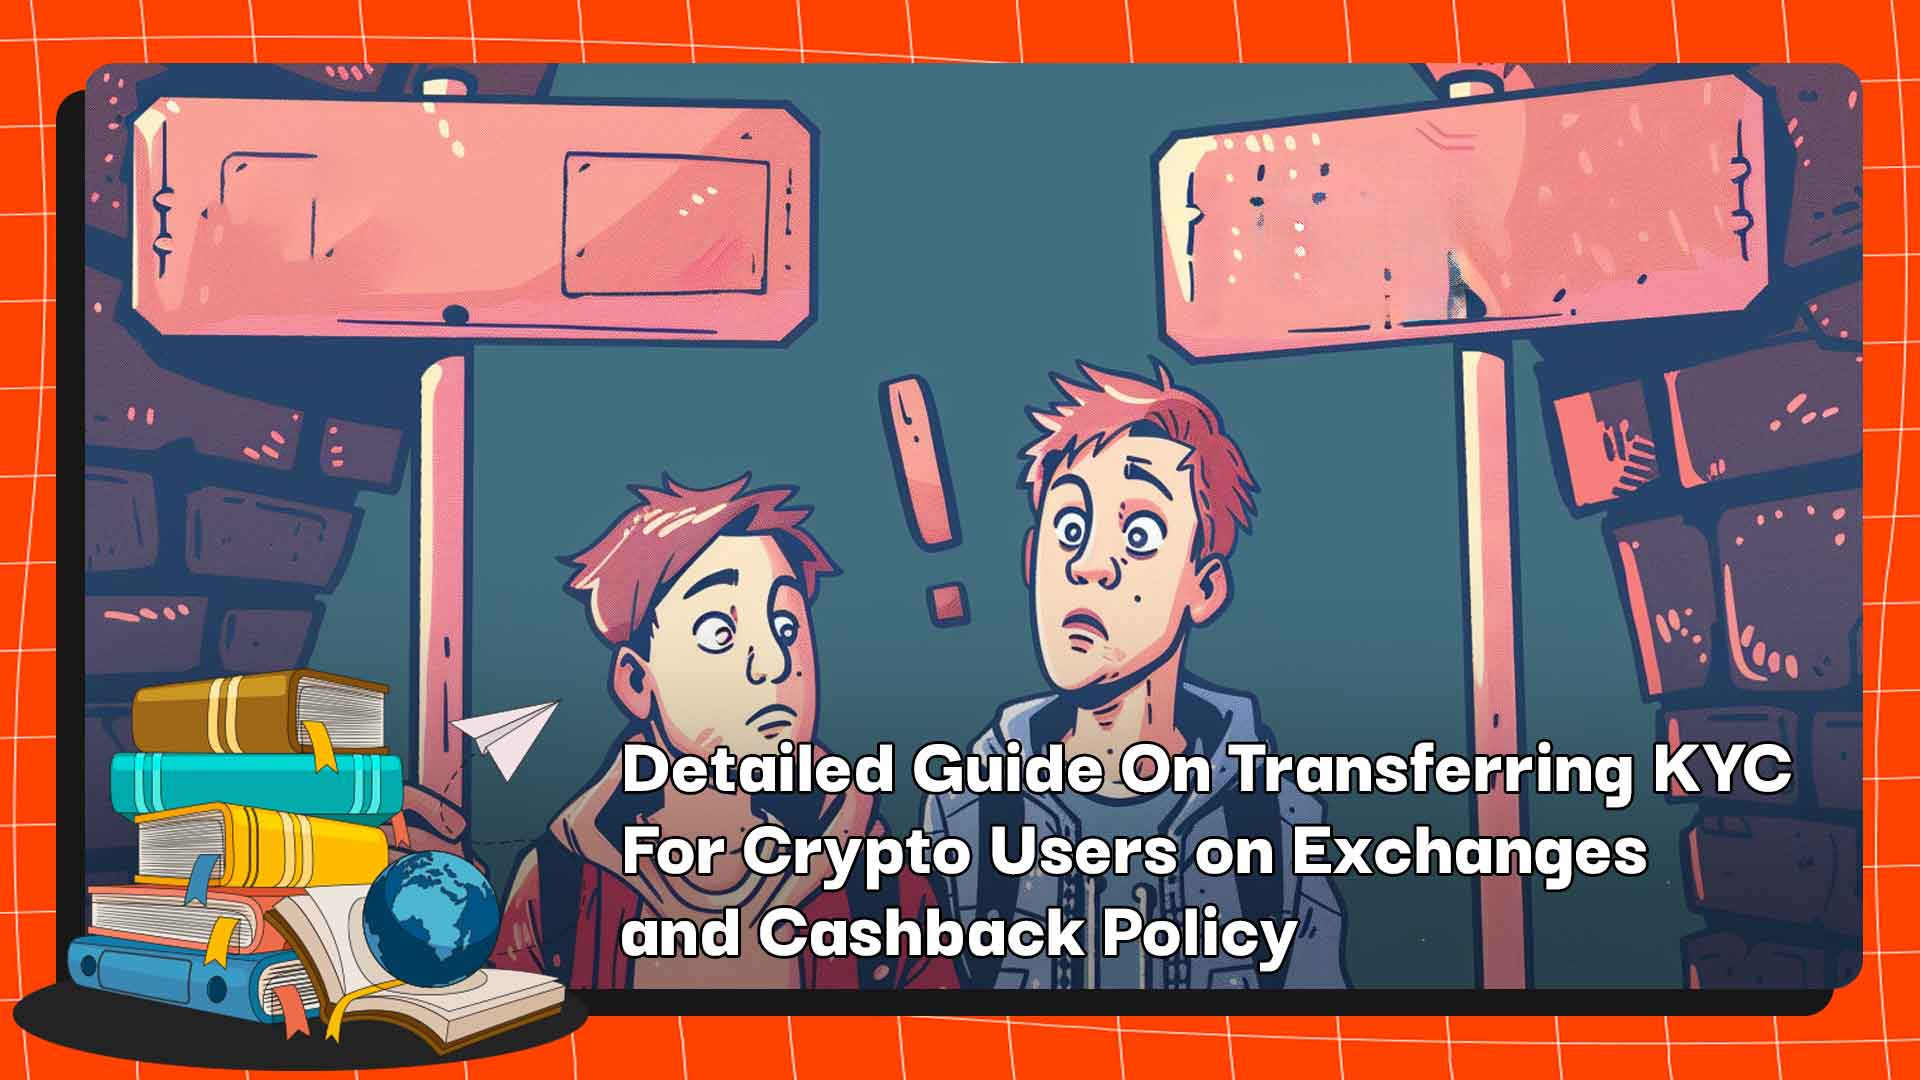 Detailed Guide On Transferring KYC For Crypto Users on Exchanges and Cashback Policy